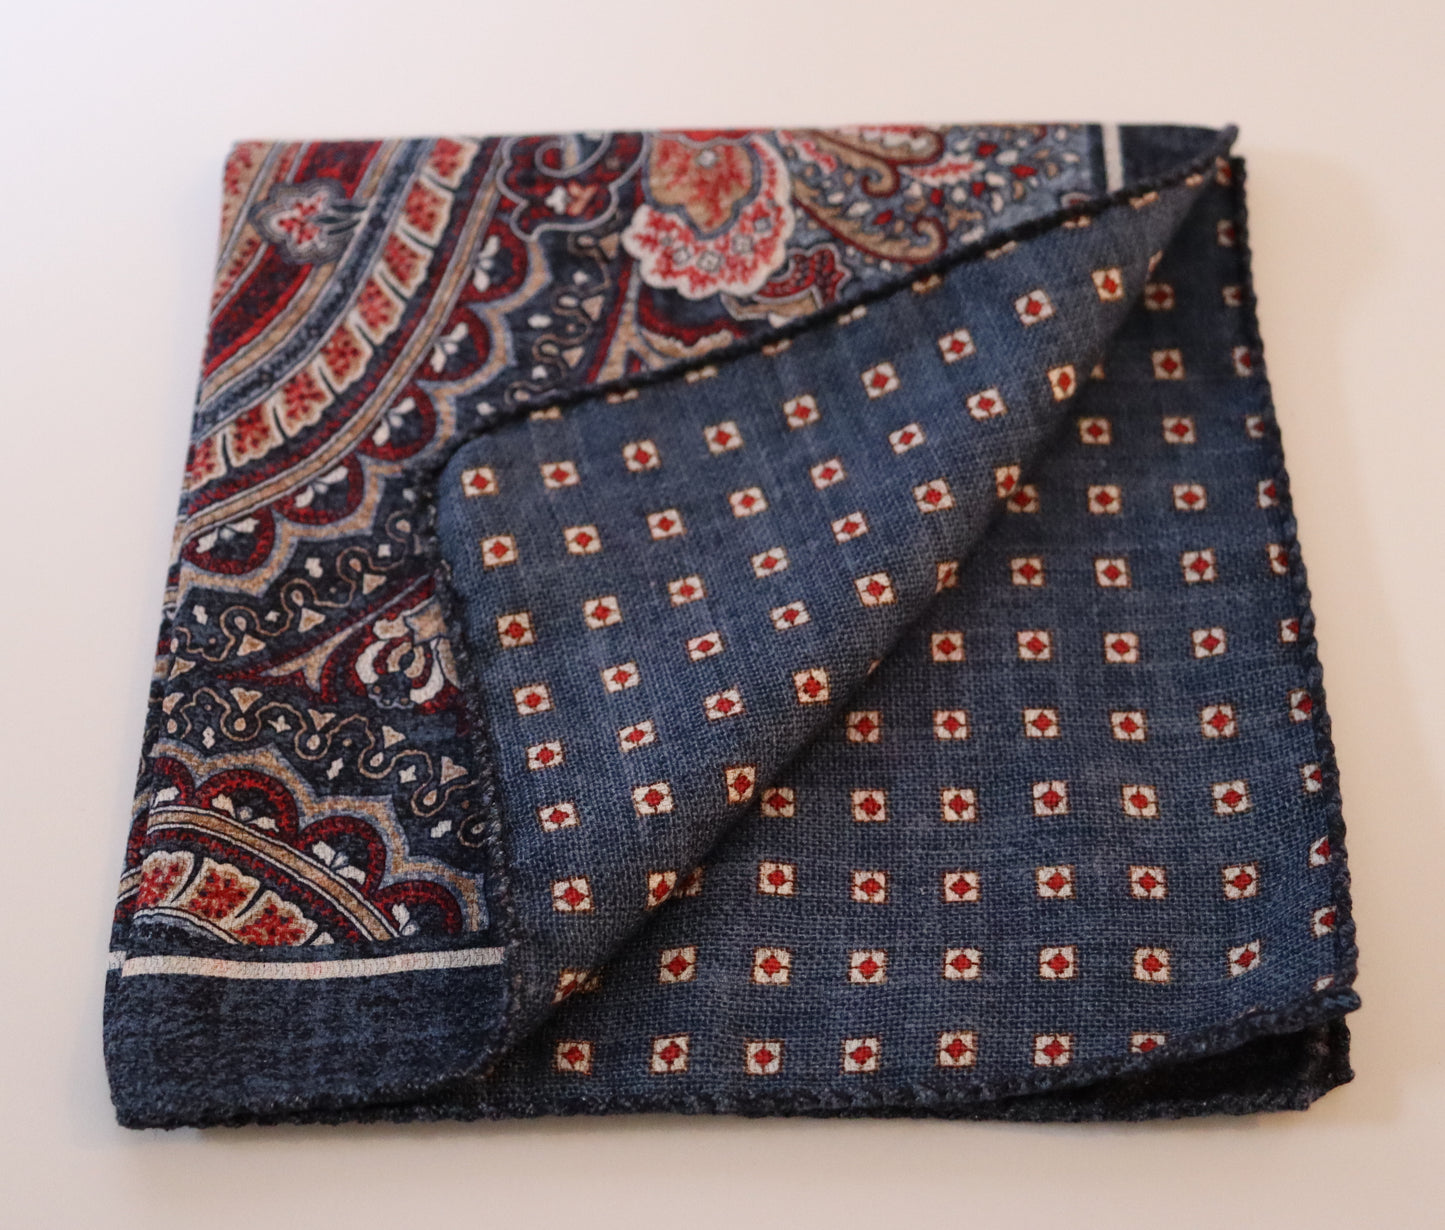 R. Hanauer Double Sided Paisley/Geometric Pocket Square - 3 Colors